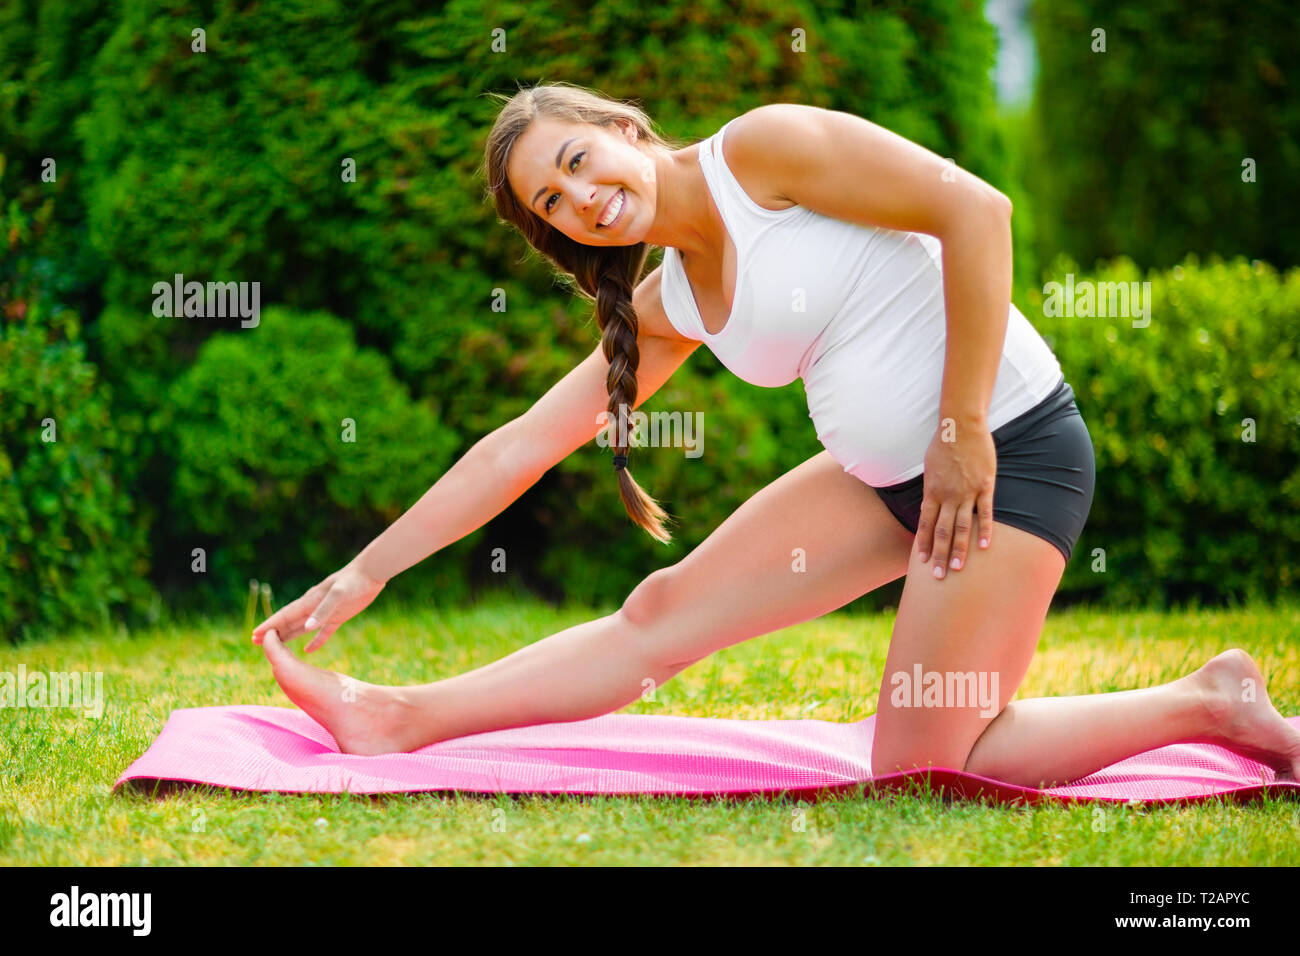 Pregnant Woman Smiling While Touching Toe On Exercise Mat Stock Photo